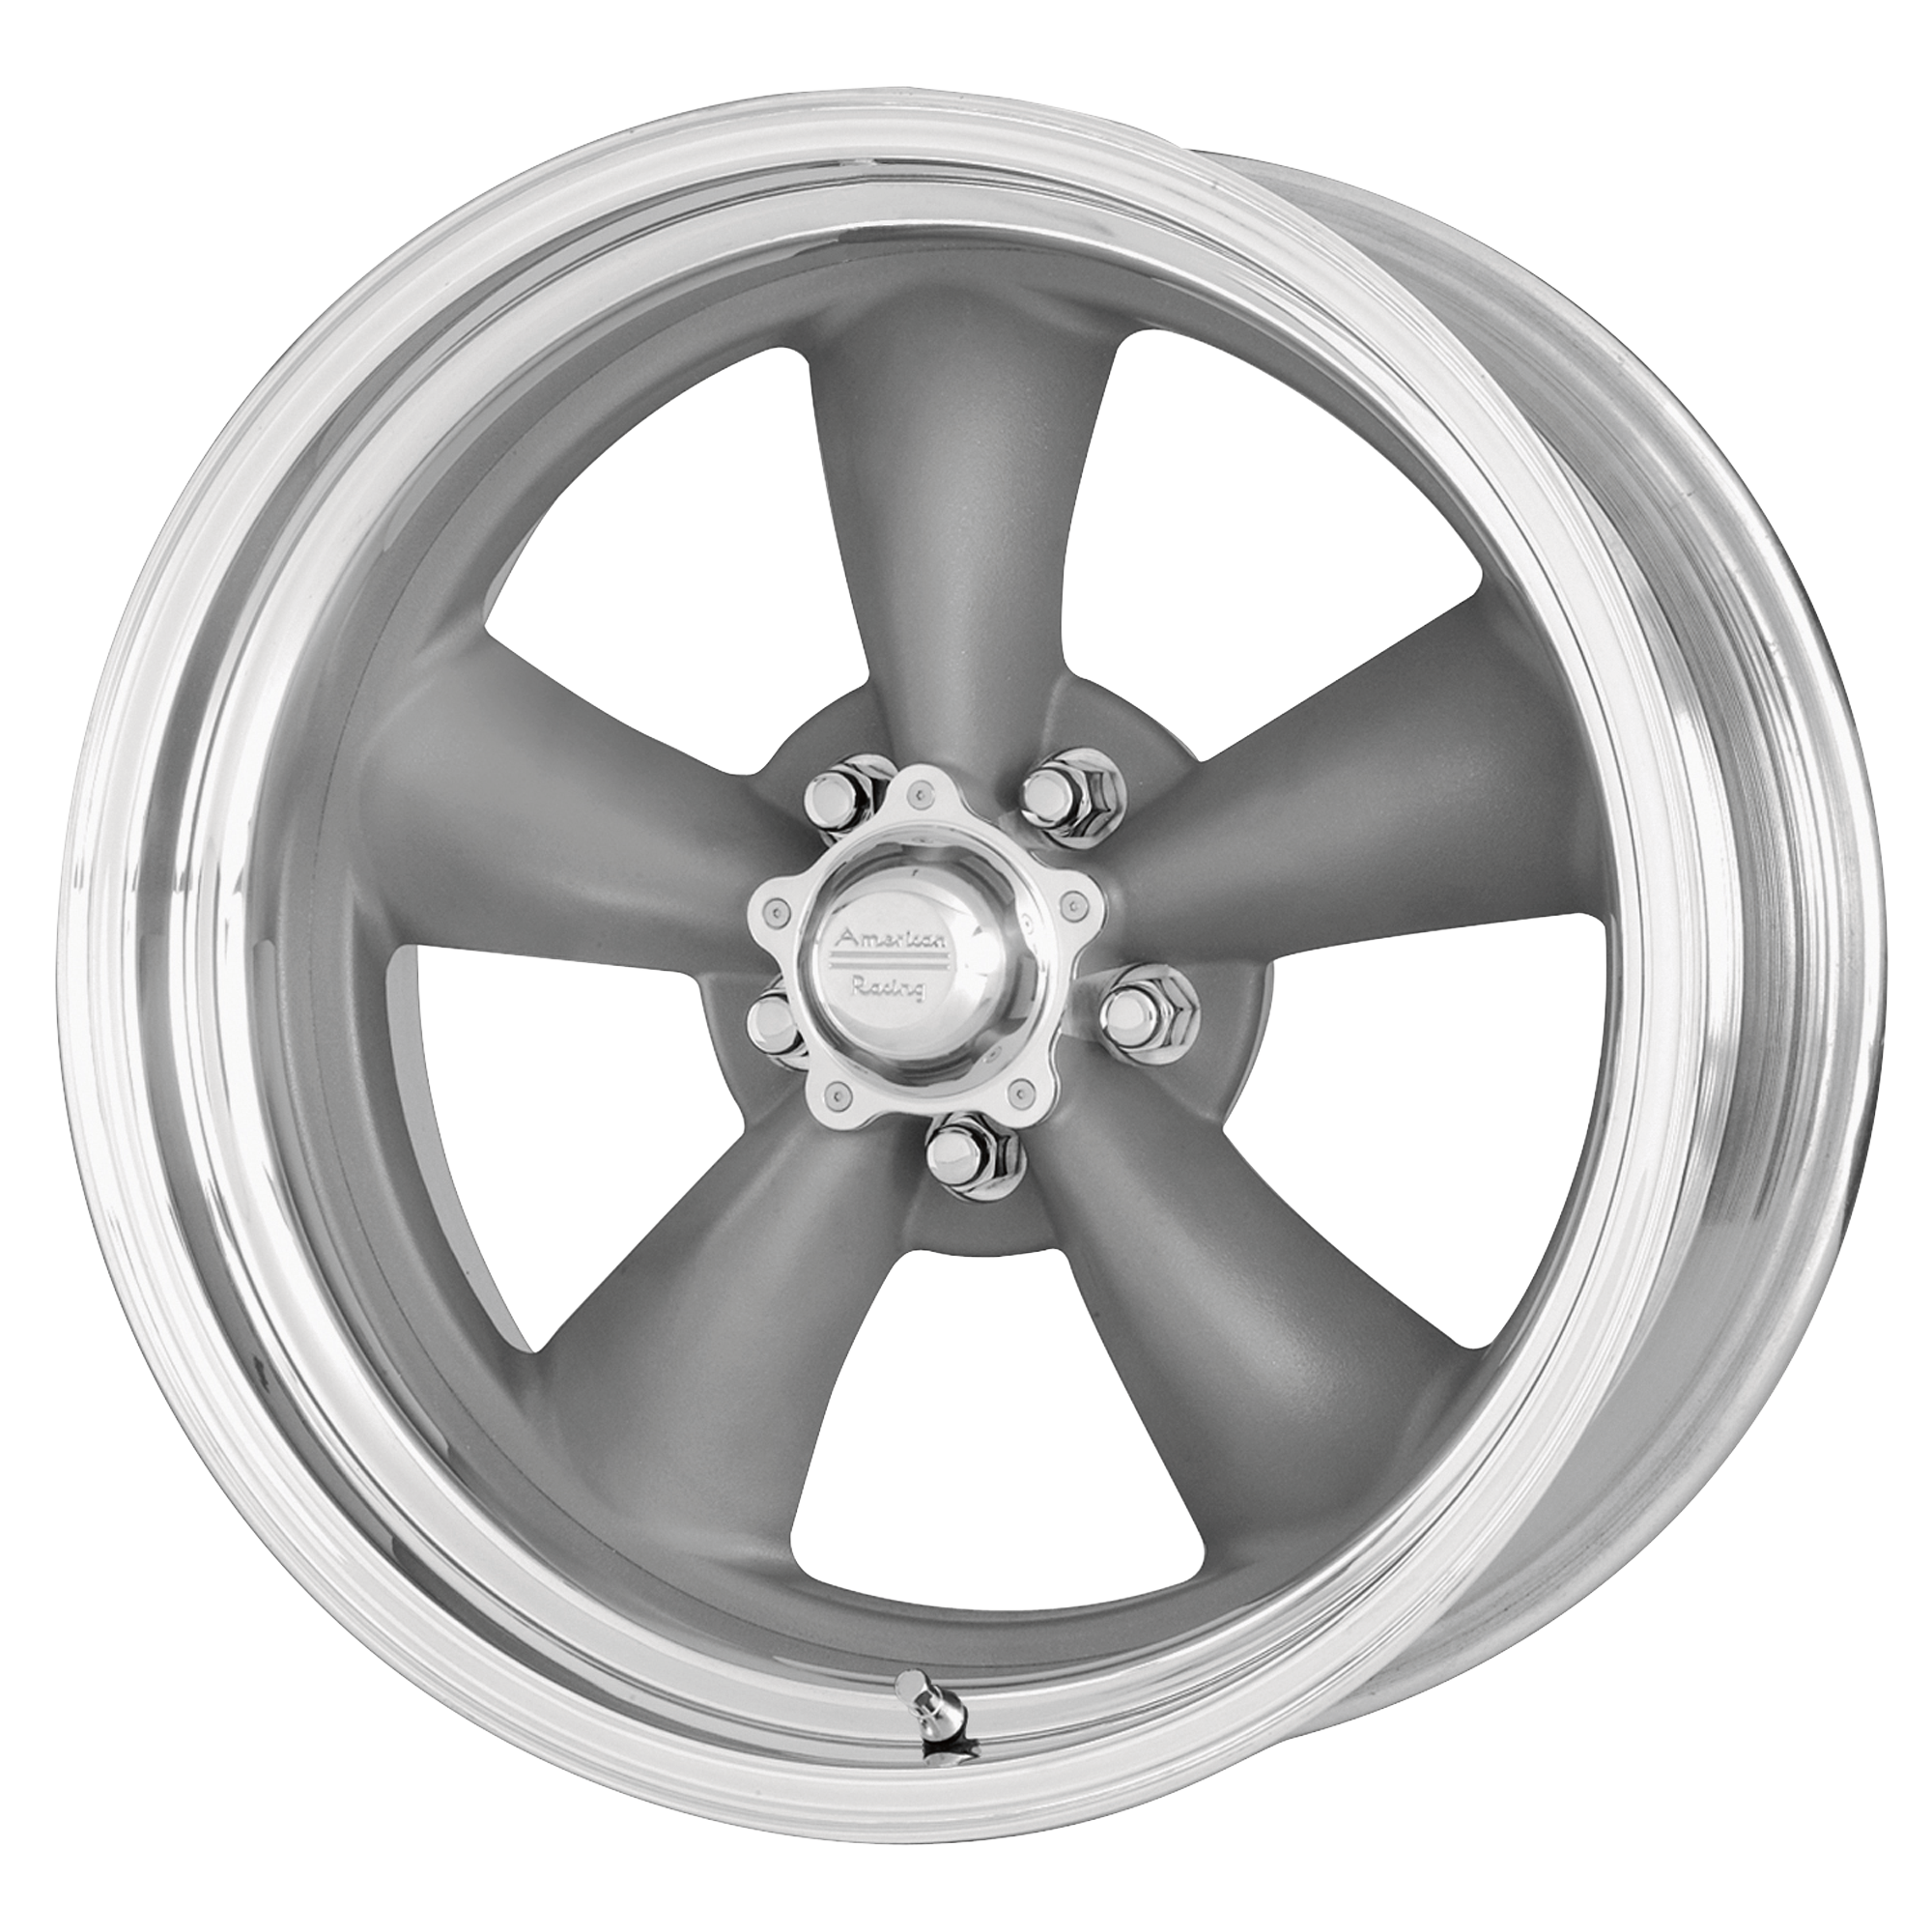 CLASSIC TORQ THRUST II ONE PIECE 17x8 5x114.30 MAG GRAY W/ MACHINED LIP (8 mm) - Tires and Engine Performance